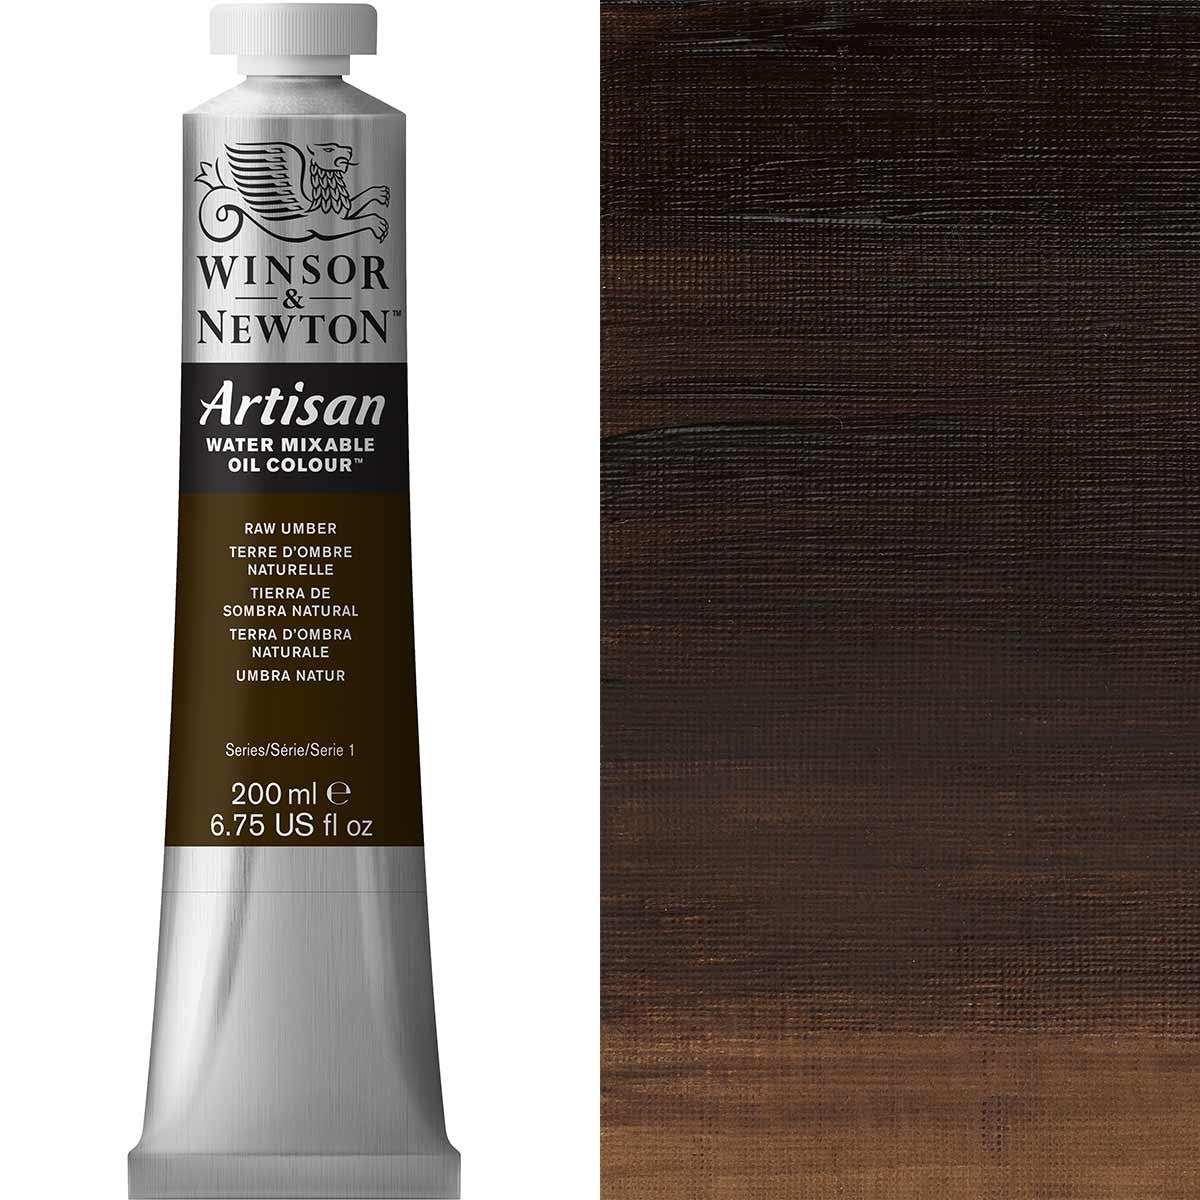 Winsor en Newton - Artisan Oil Color Water Mixable - 200 ml - Raw Umber